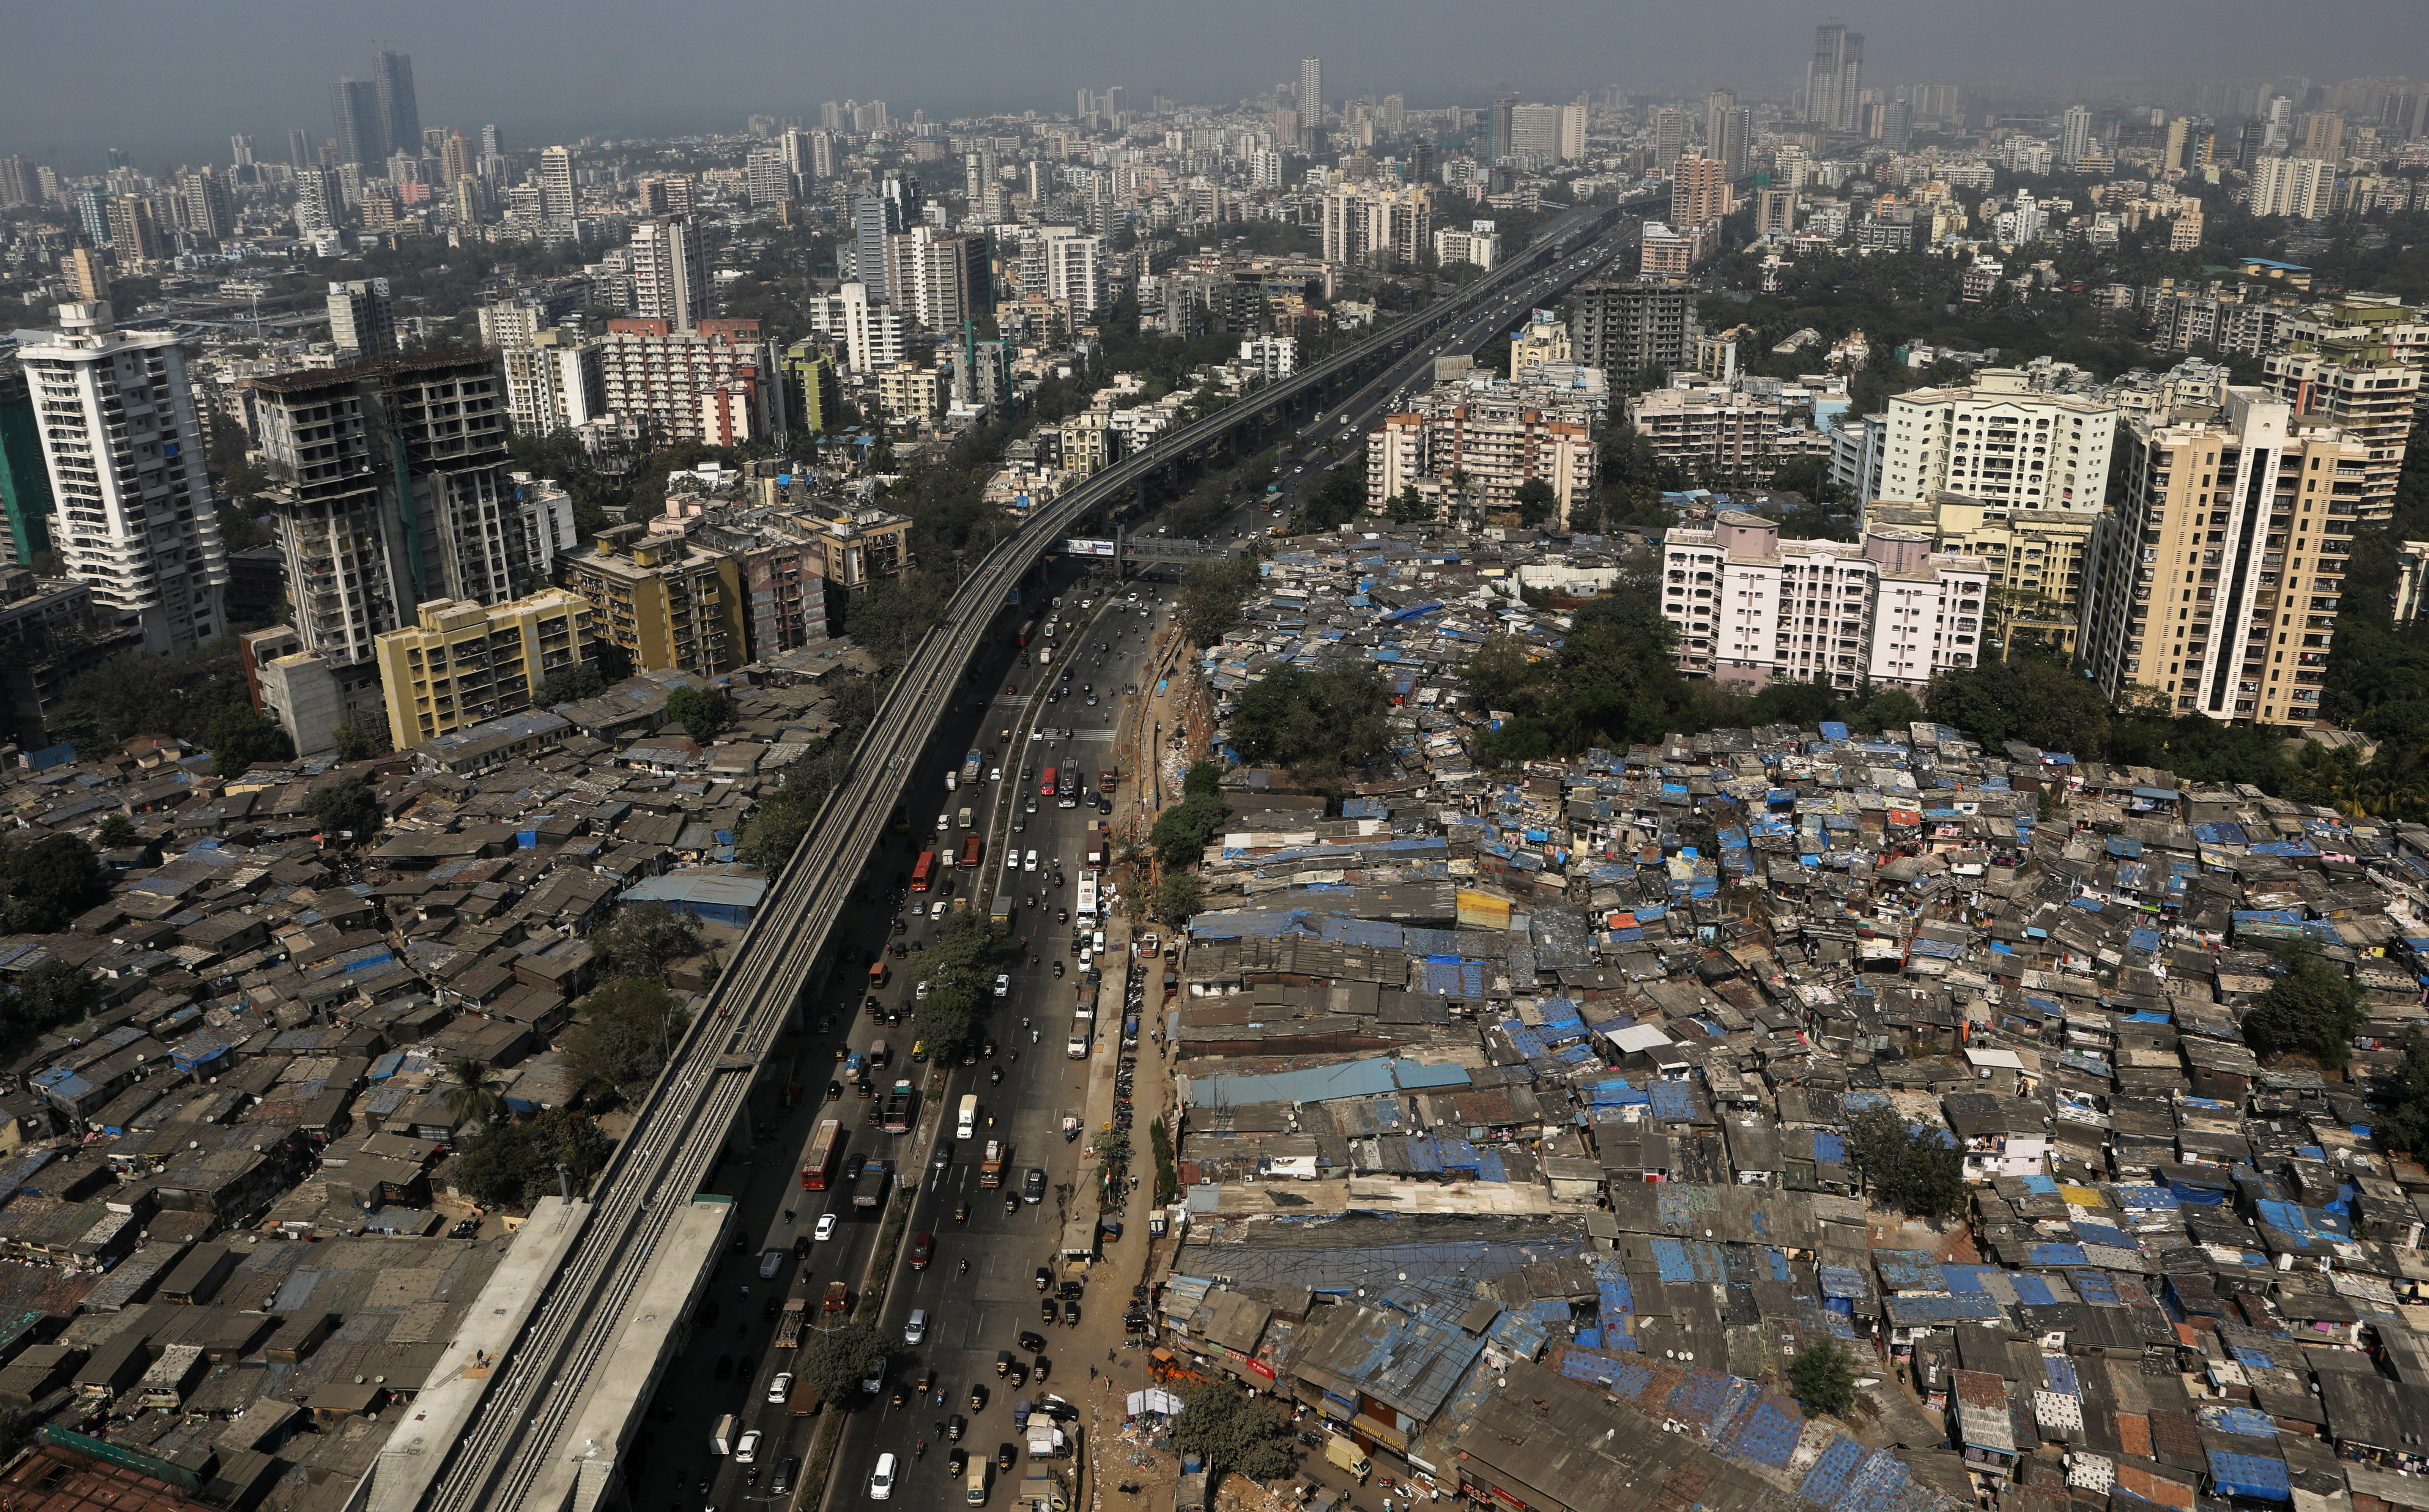 Slums and high-rise buildings are seen in Mumbai